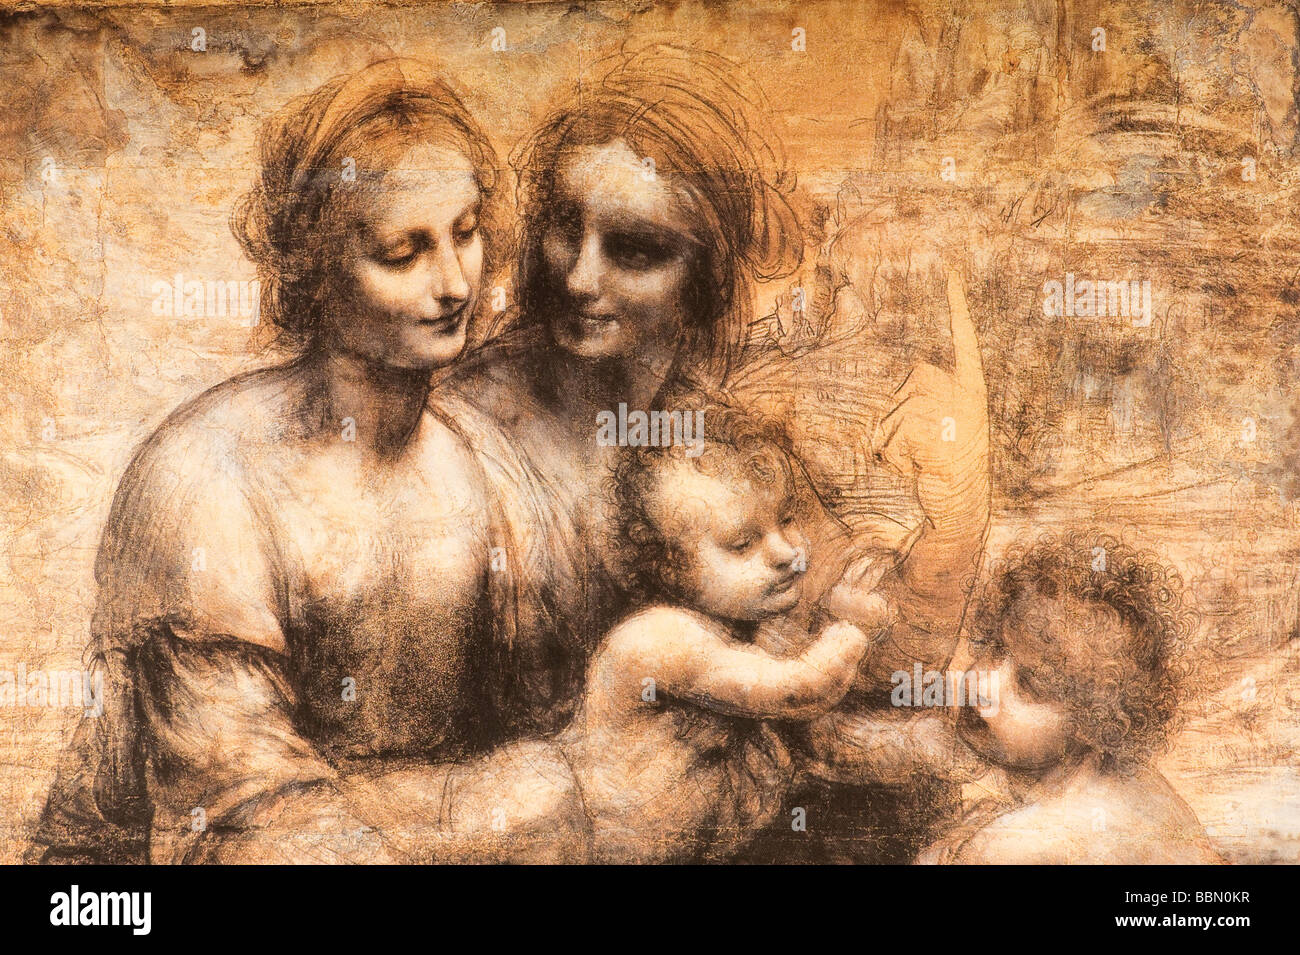 detail The Virgin and Child with St. Anne by Leonardo da Vinci Stock Photo